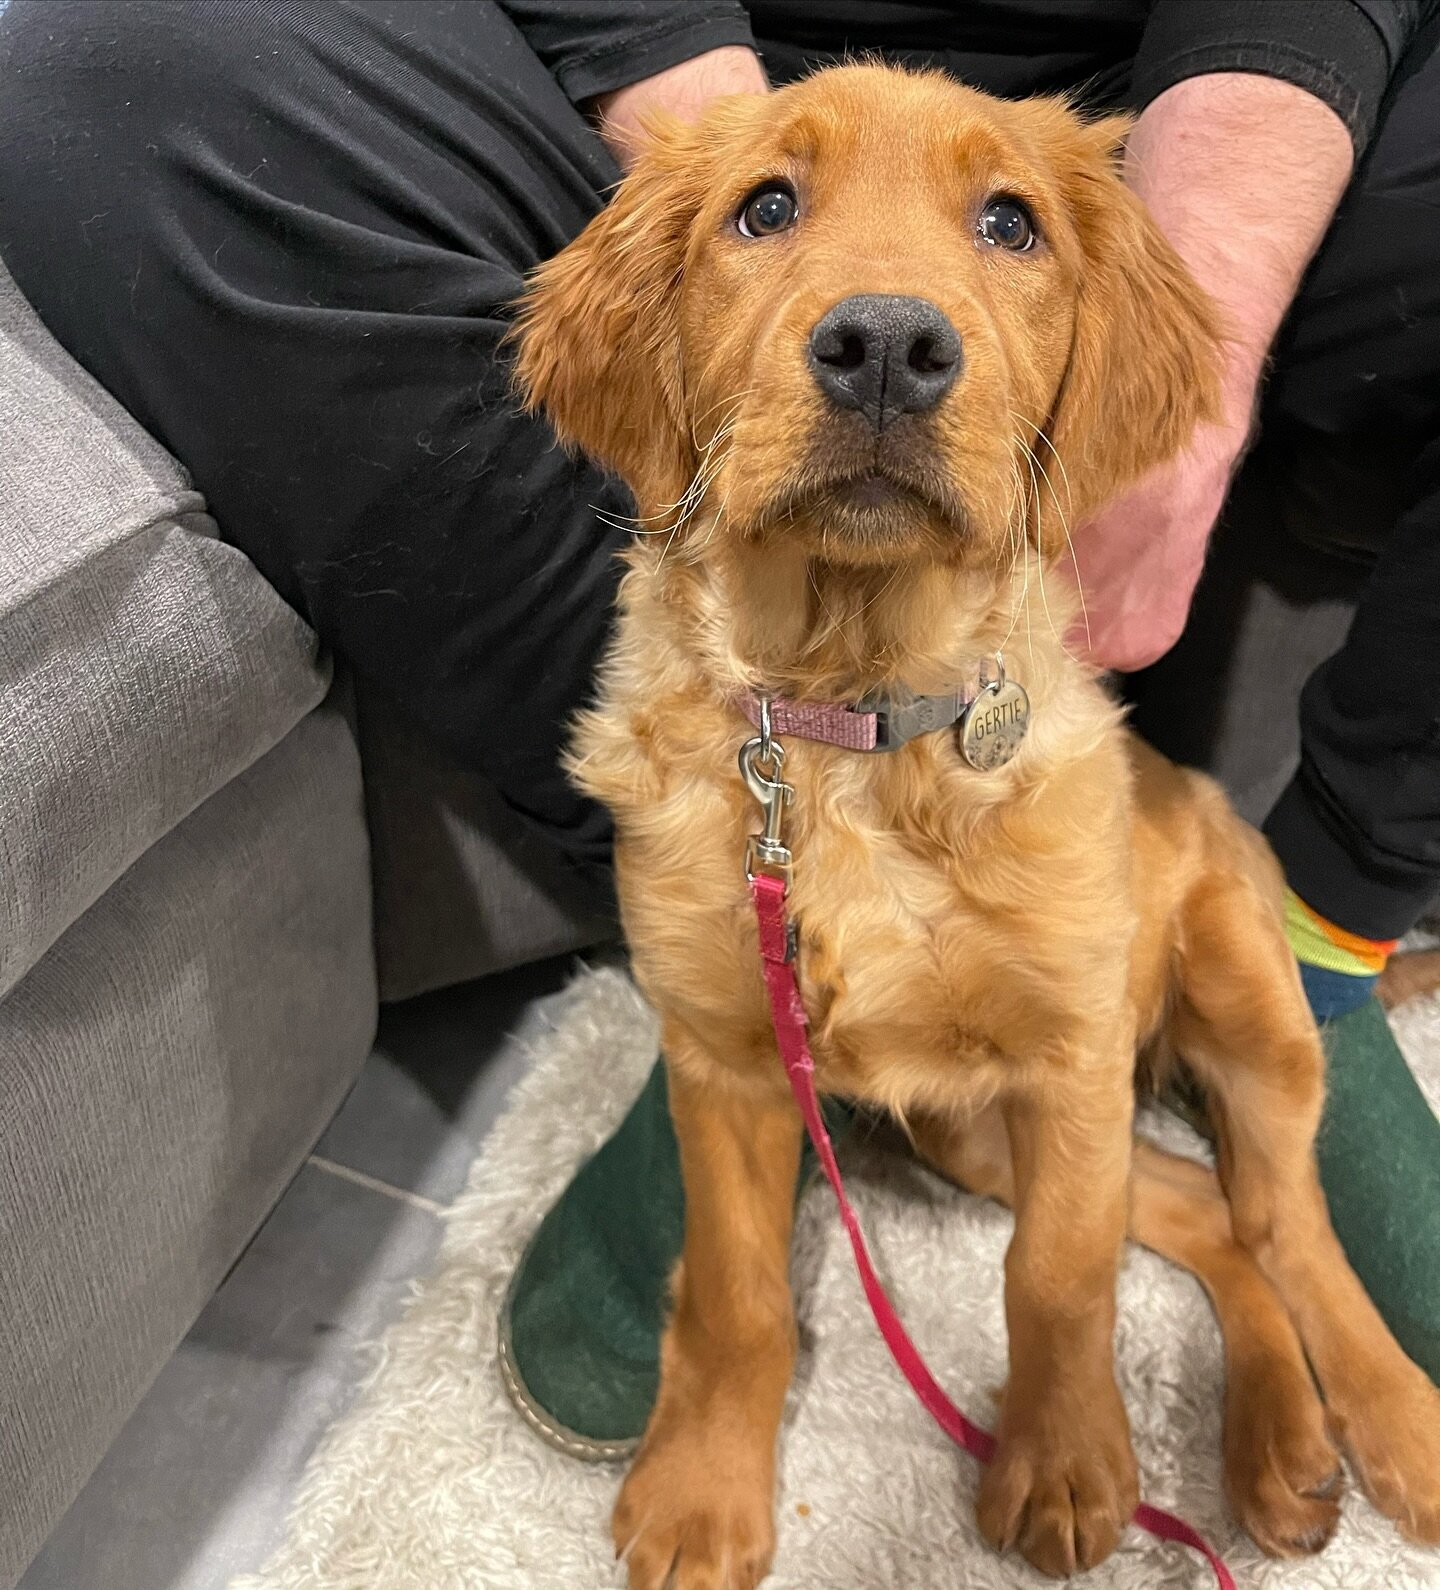 Meet the newest addition to JC goldens - little miss Gertie🐾 she&rsquo;s working with our trainer Chloe on relaxation, leash manners and overall listening skills. Such a great girl!
#hoboken #jerseycity #dogsofjerseycity #hobokendogs #goldenpuppy #p